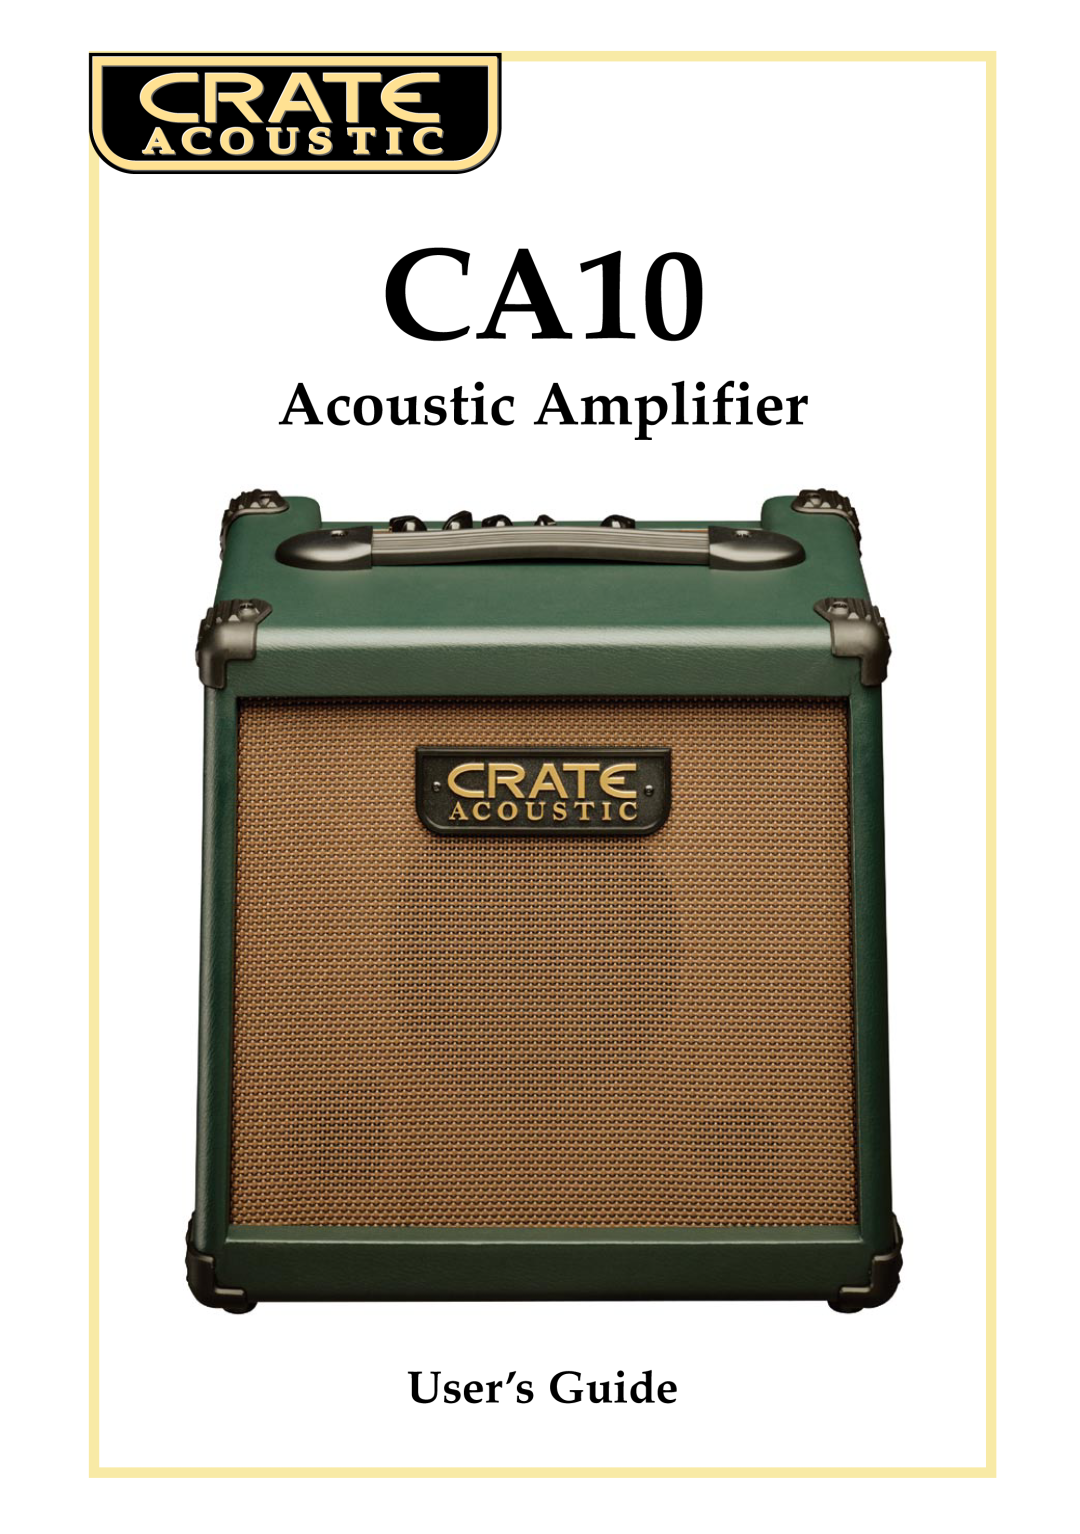 Crate Amplifiers CA10 manual Acoustic Amplifier, User’s Guide 